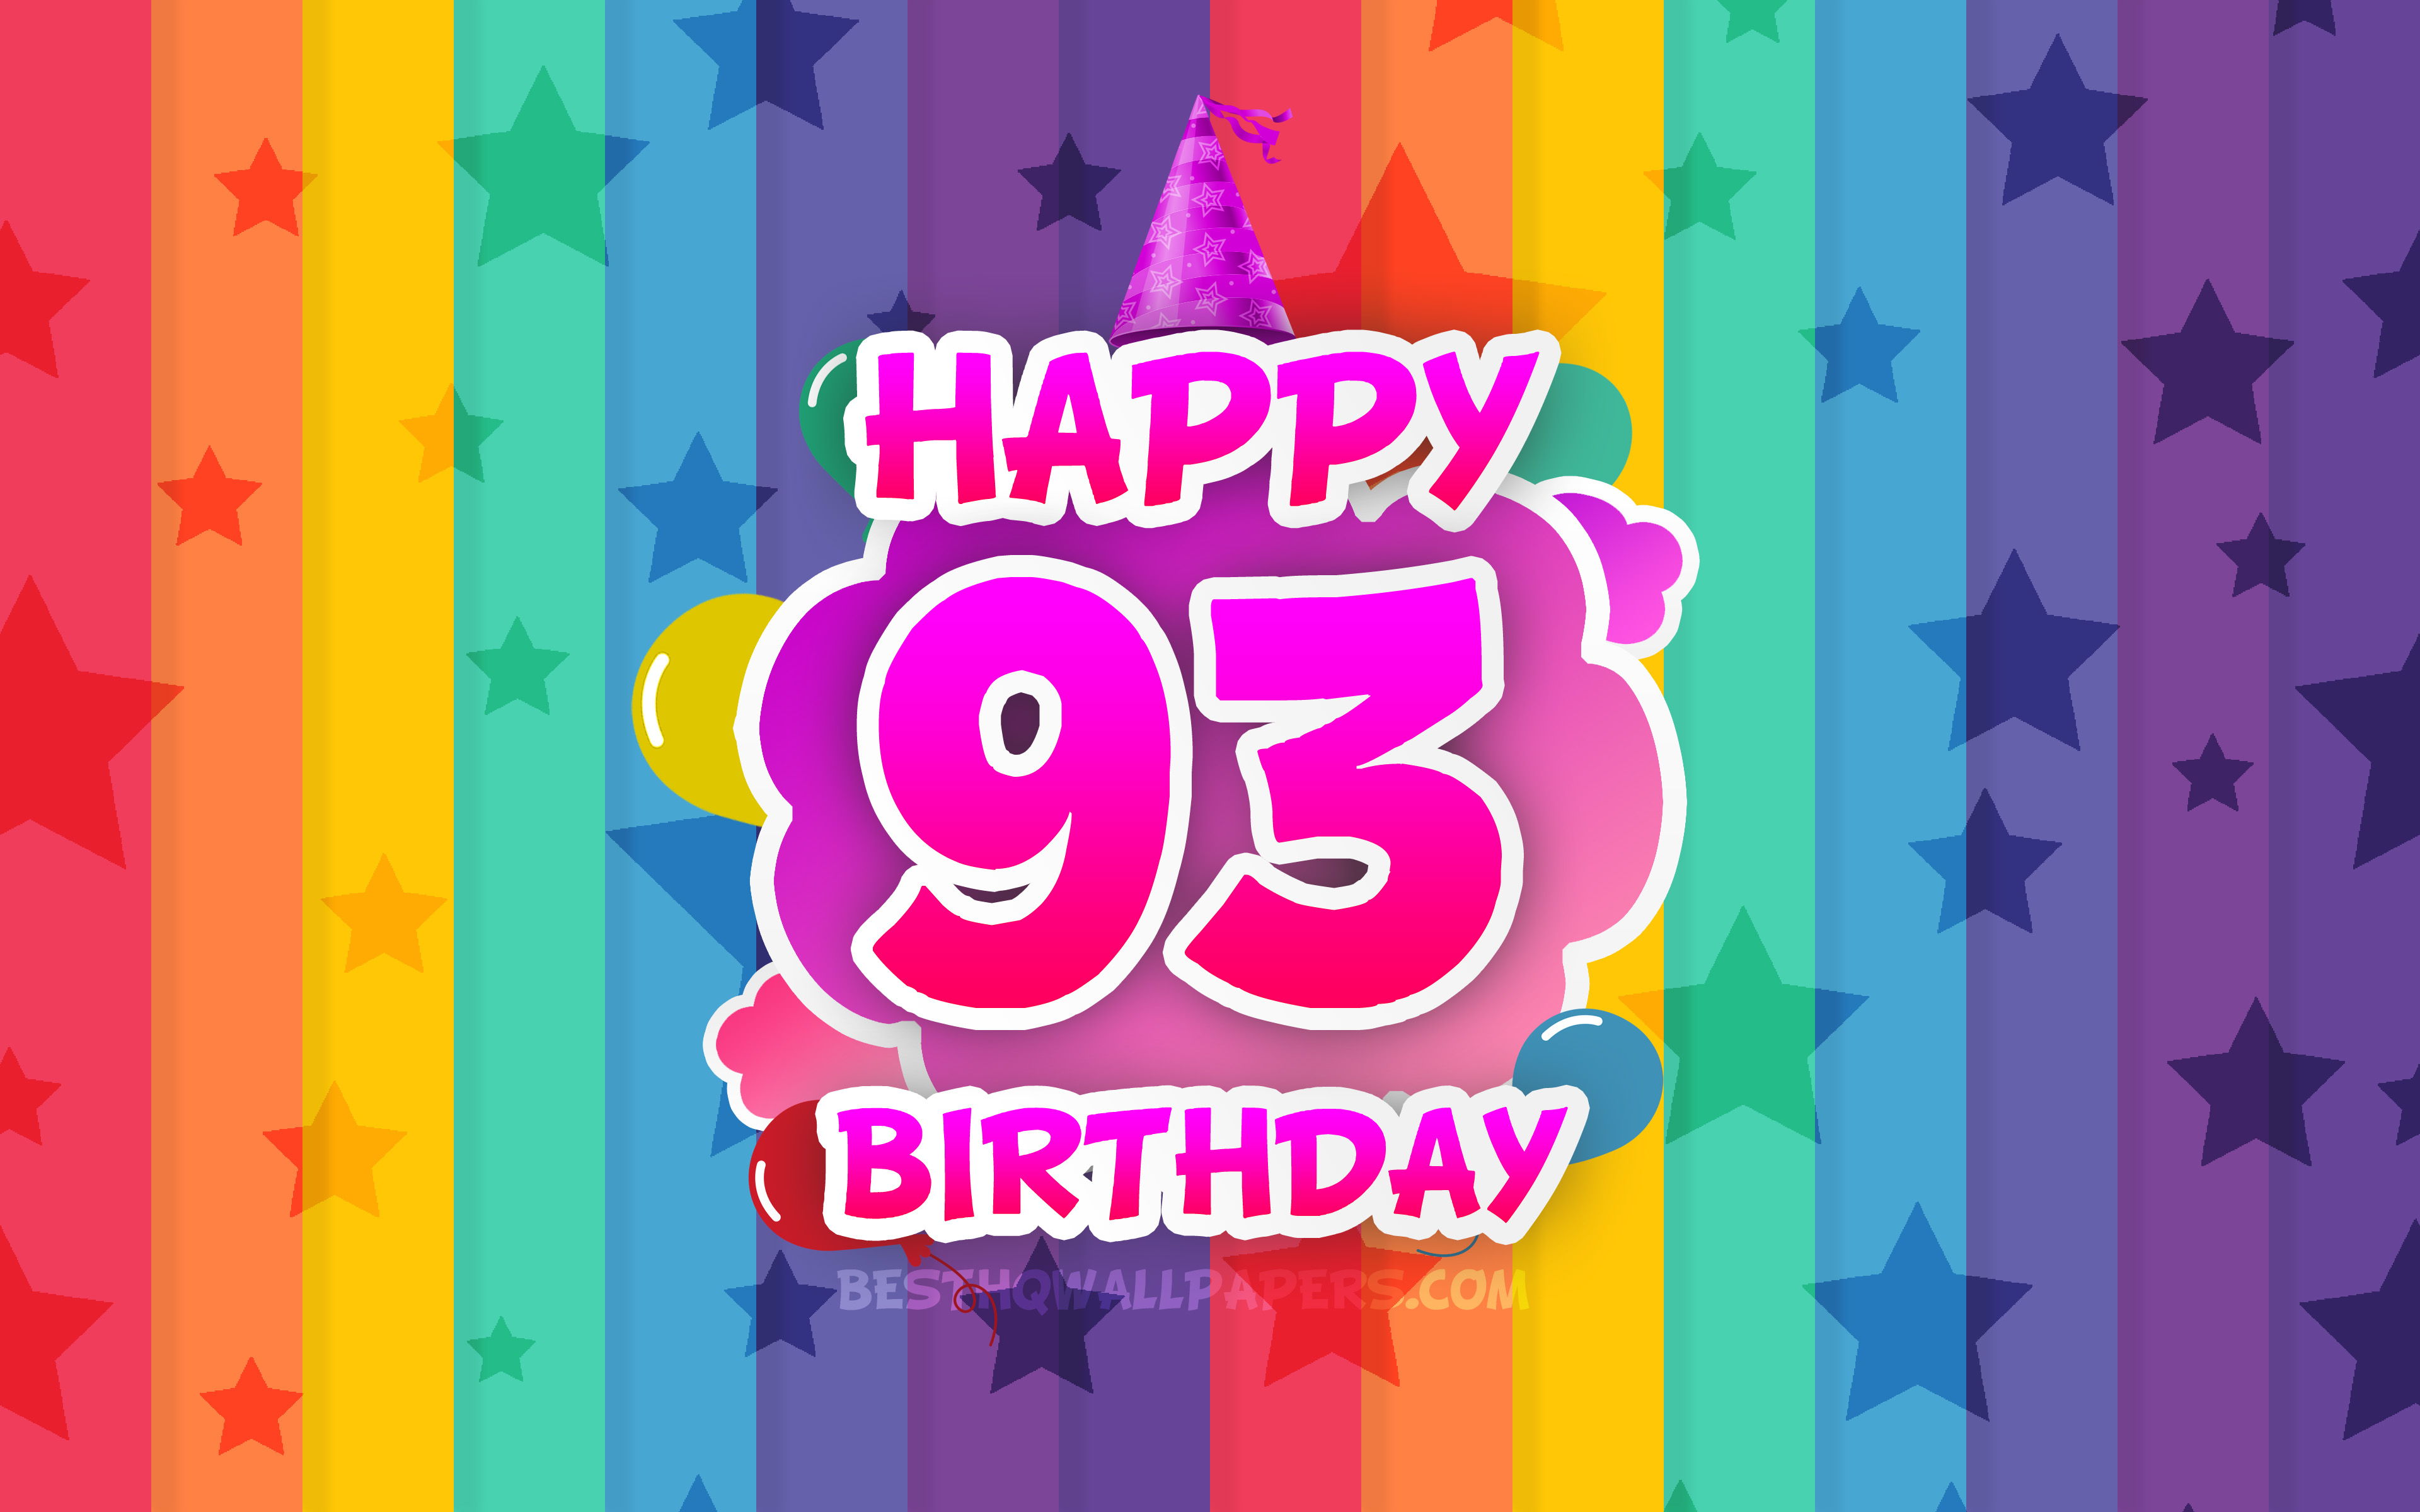 Download wallpapers Happy 93rd birthday, colorful clouds, 4k, Birthday ...